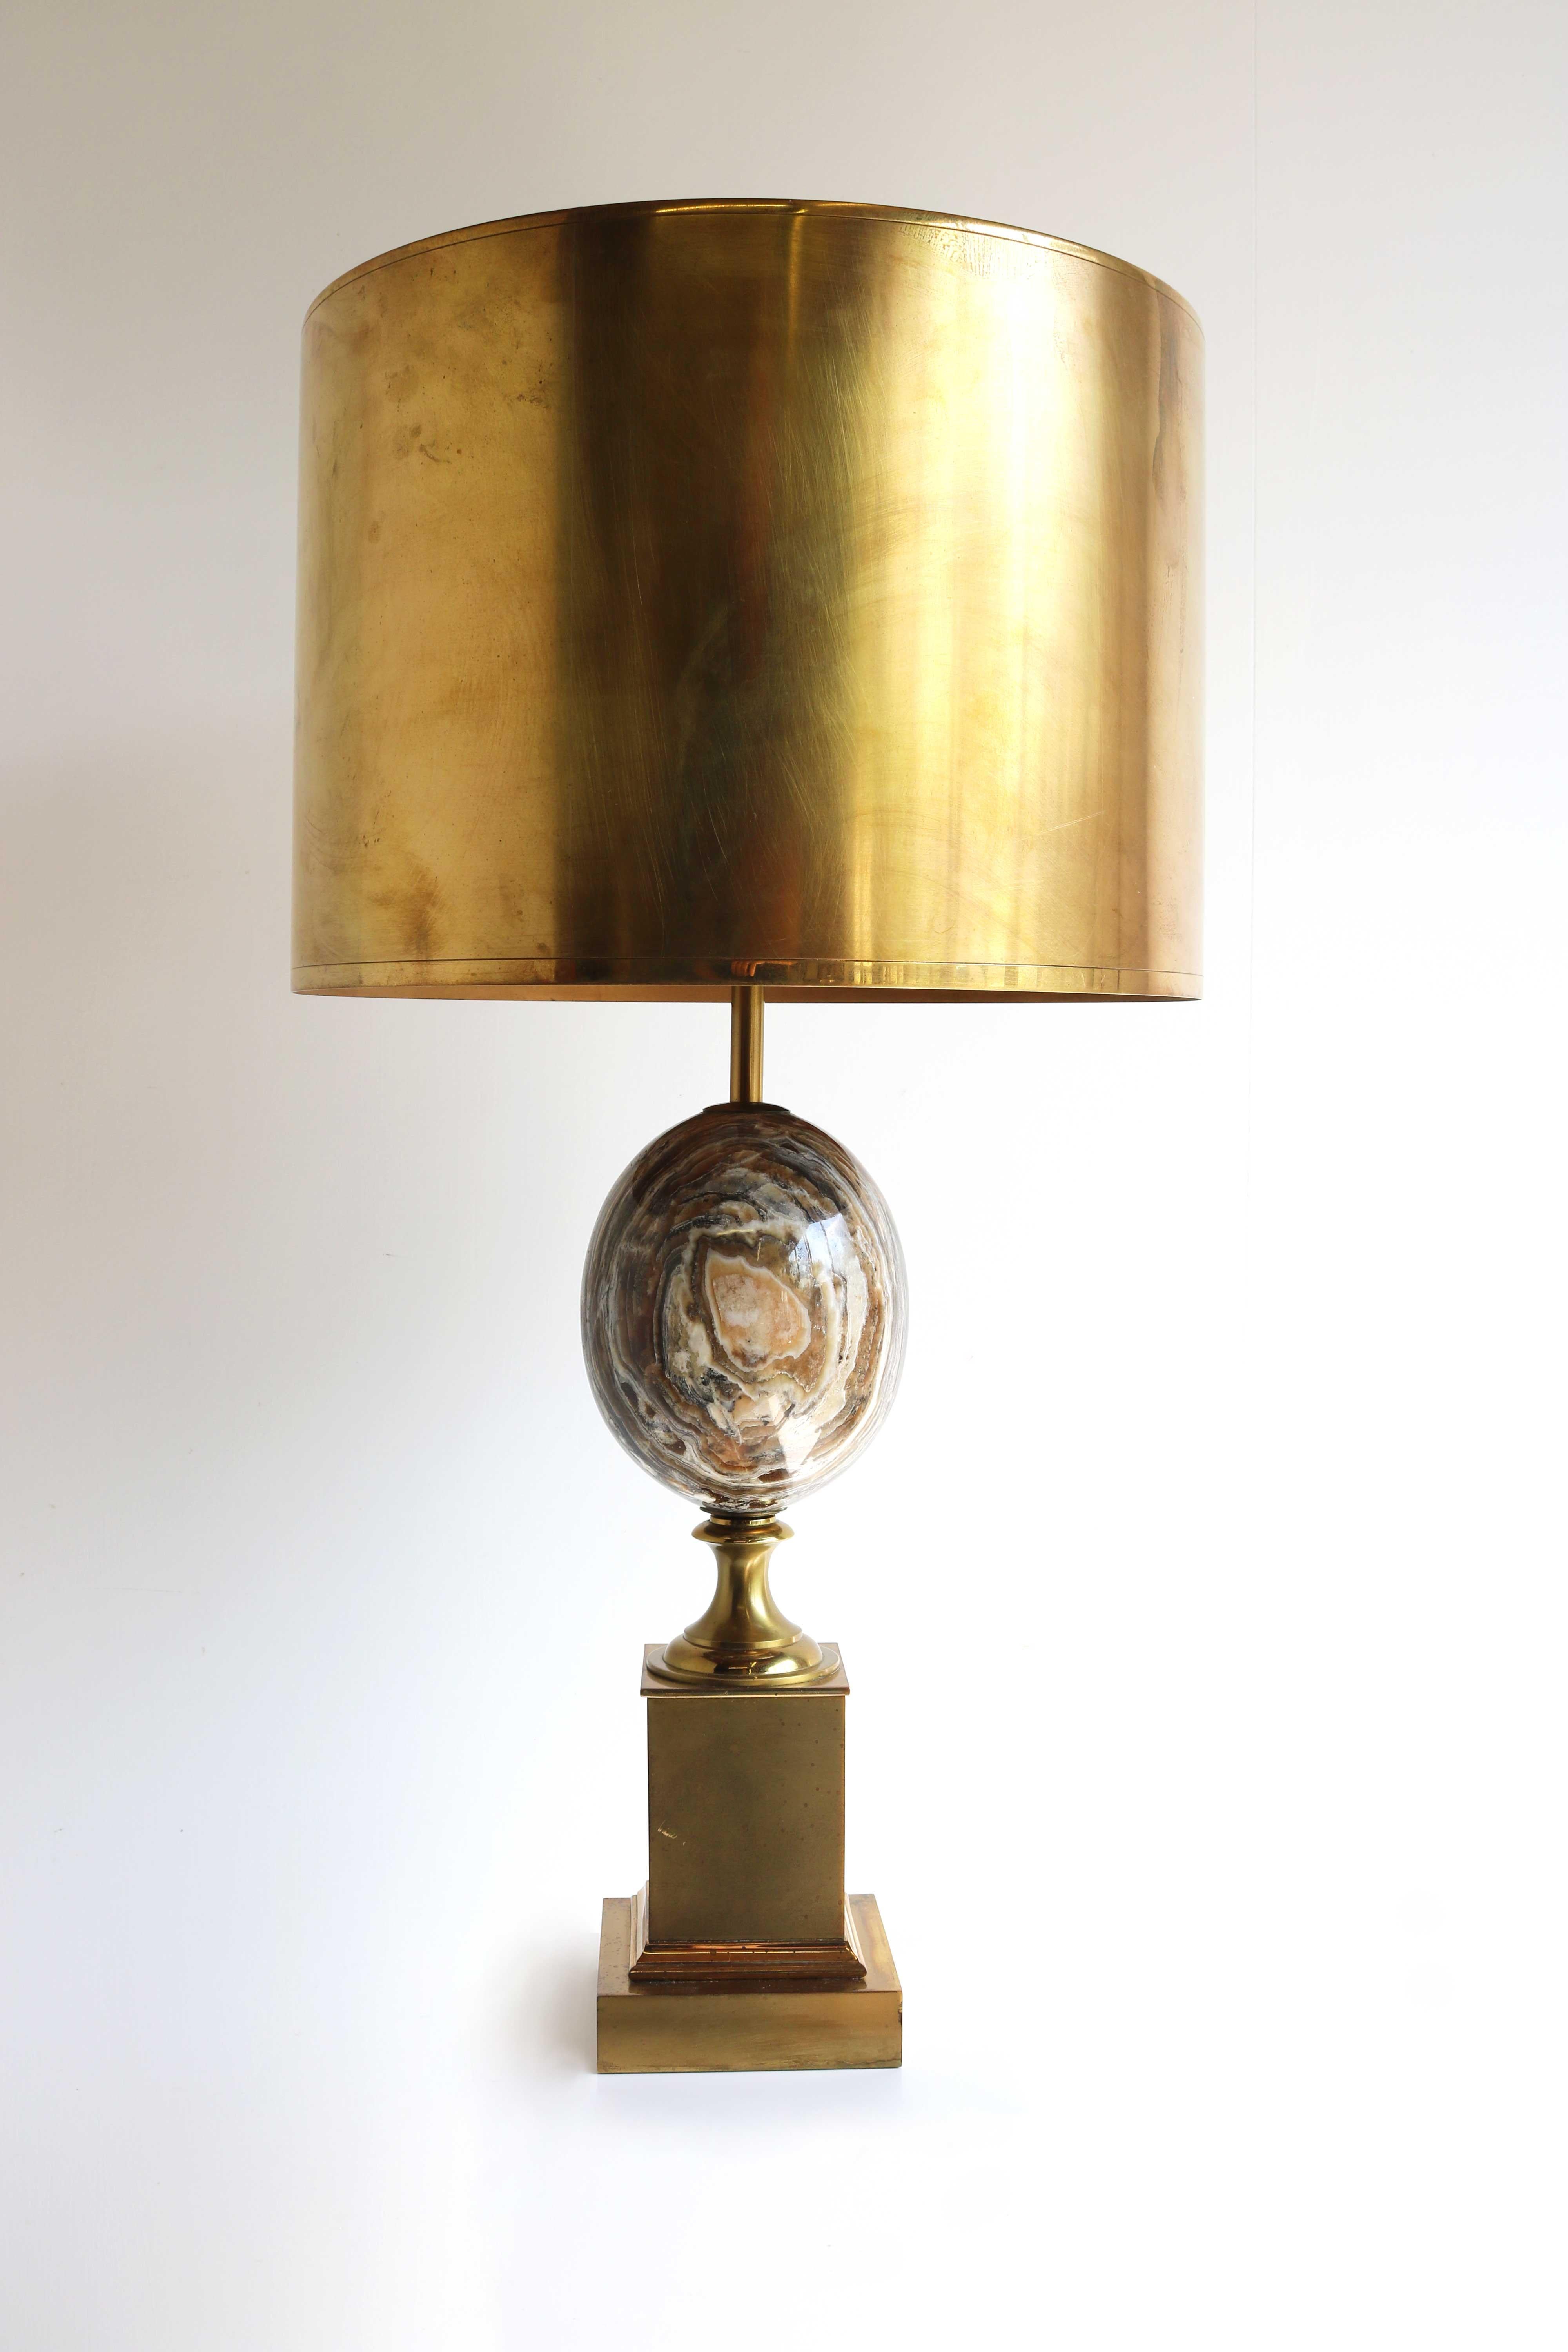 Marble egg table lamp/ desk light Signed by Maison Charles, France 1960s

We present you a beautiful chic table lamp, signed by Maison Charles. Fully handmade in the 1960’s in France by the ateliers of Charles. Marble egg on a solid brass pedestal